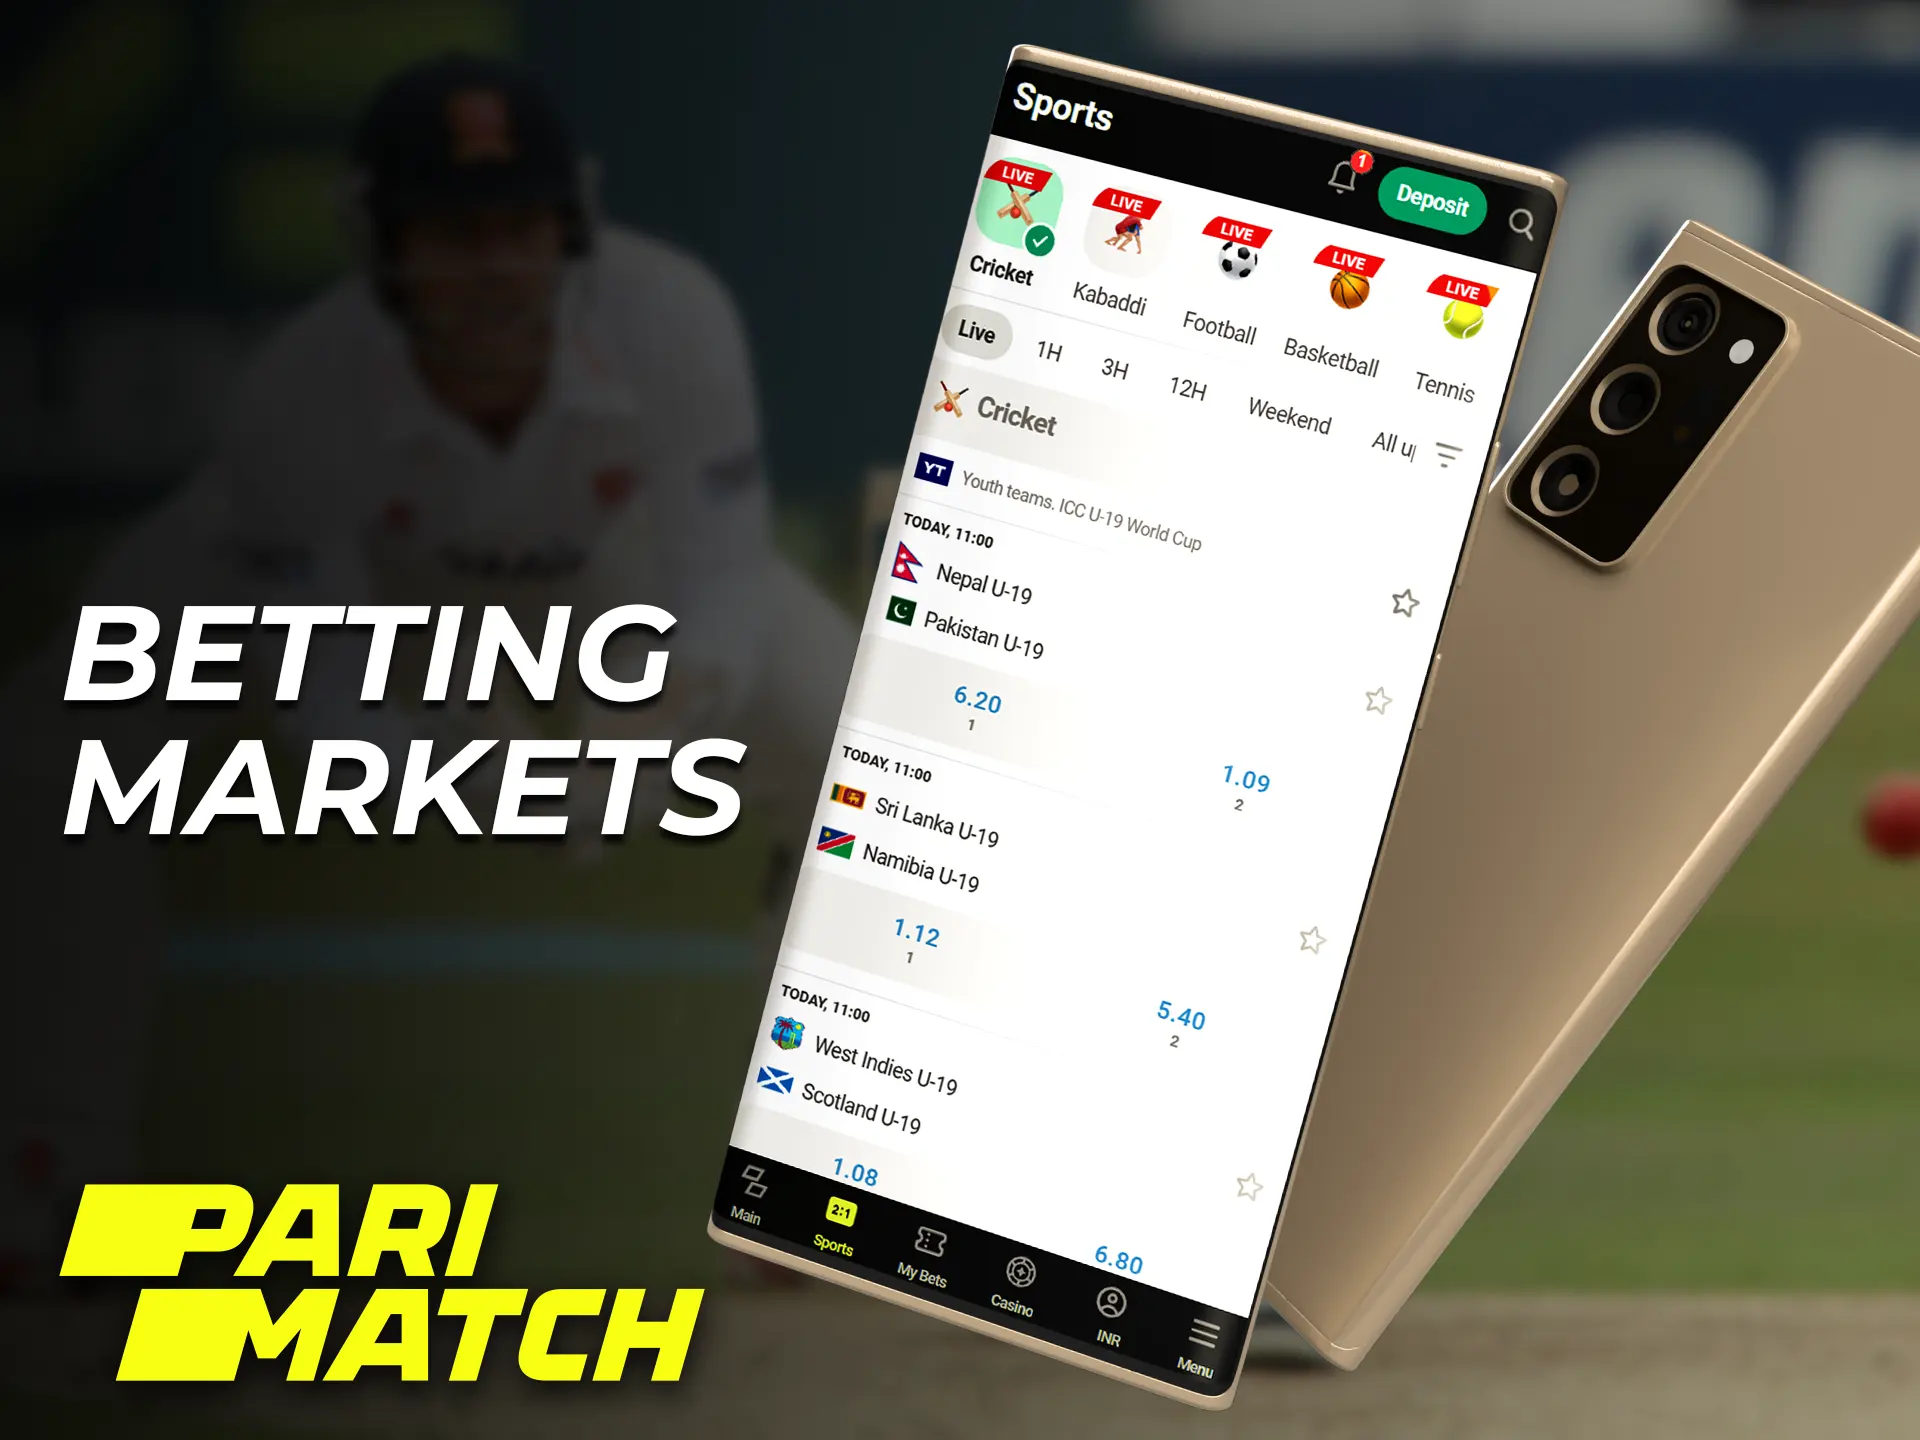 Parimatch app has a lot of betting markets on sports matches.